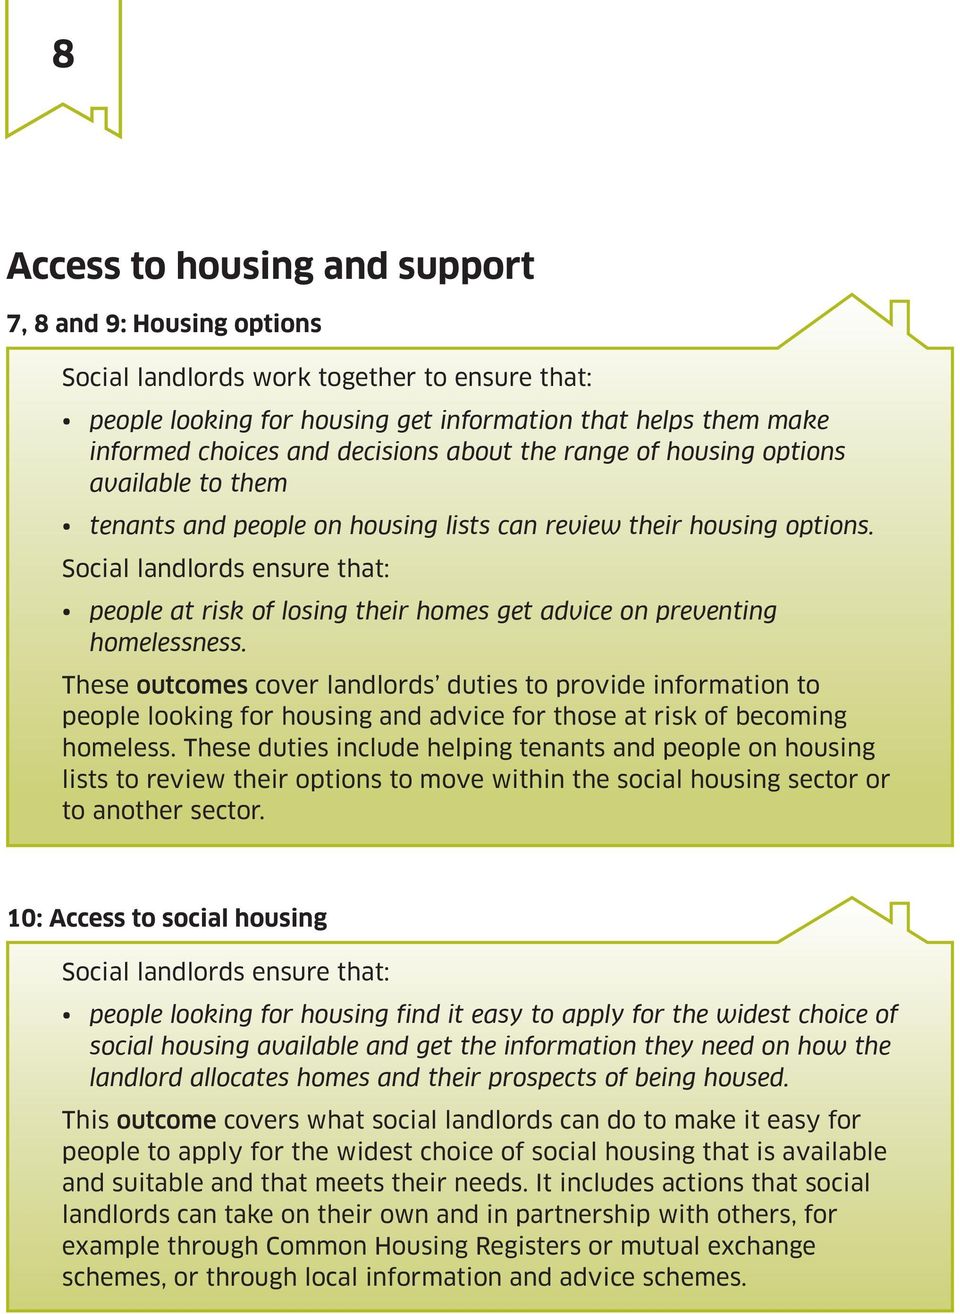 Social landlords ensure that: people at risk of losing their homes get advice on preventing homelessness.